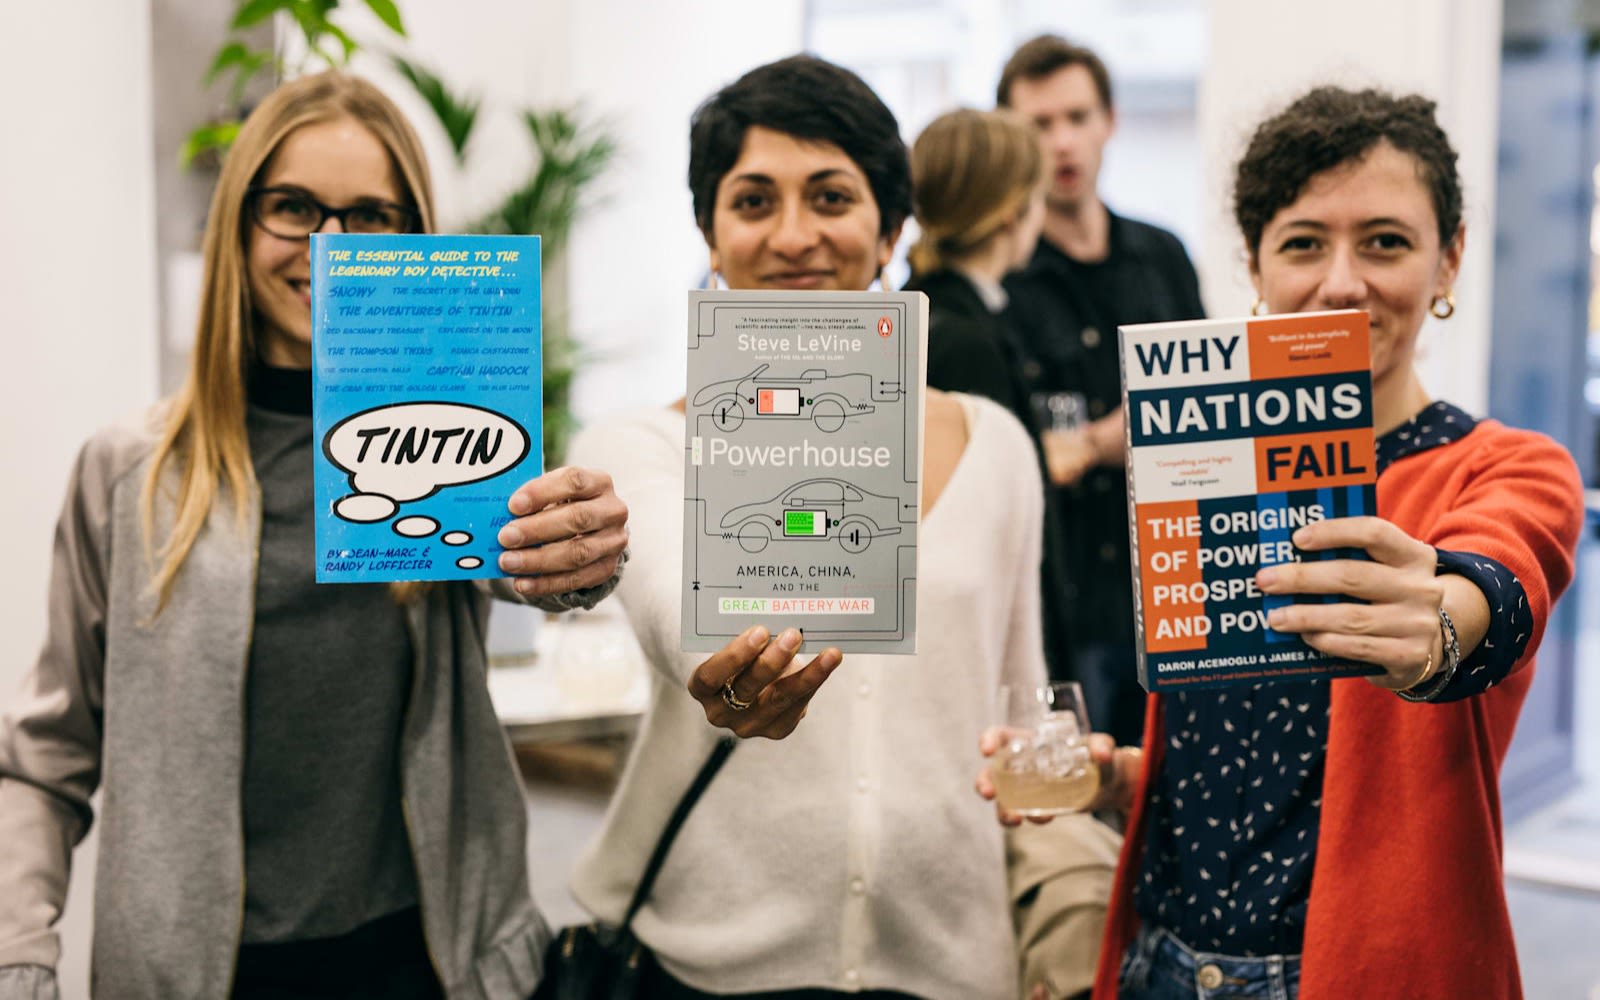 Rebel Book Club members. Three women stand shoulder to shoulder holding a book towards the camera. The book titles are TinTin, Powerhouse and Why Nations Fail